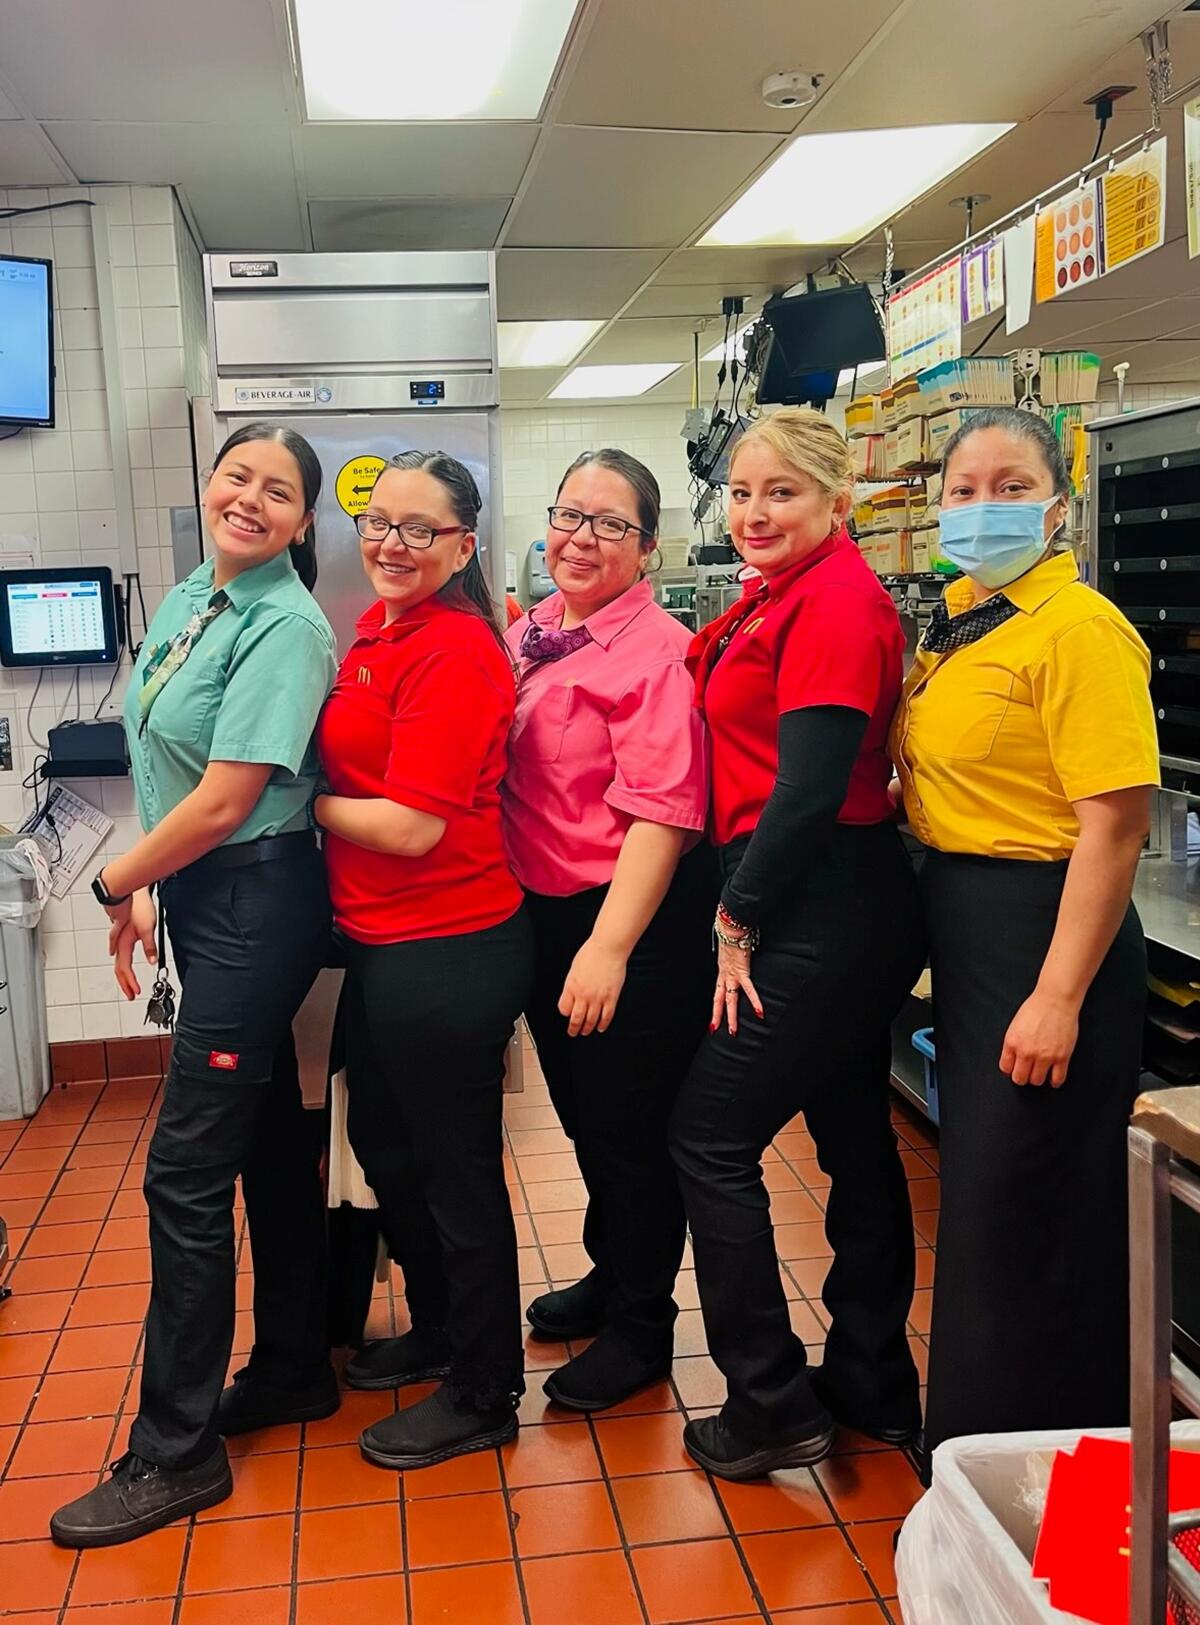 Elizabeth Machado, second from left, in uniform with her team at McDonald’s in Westminster.